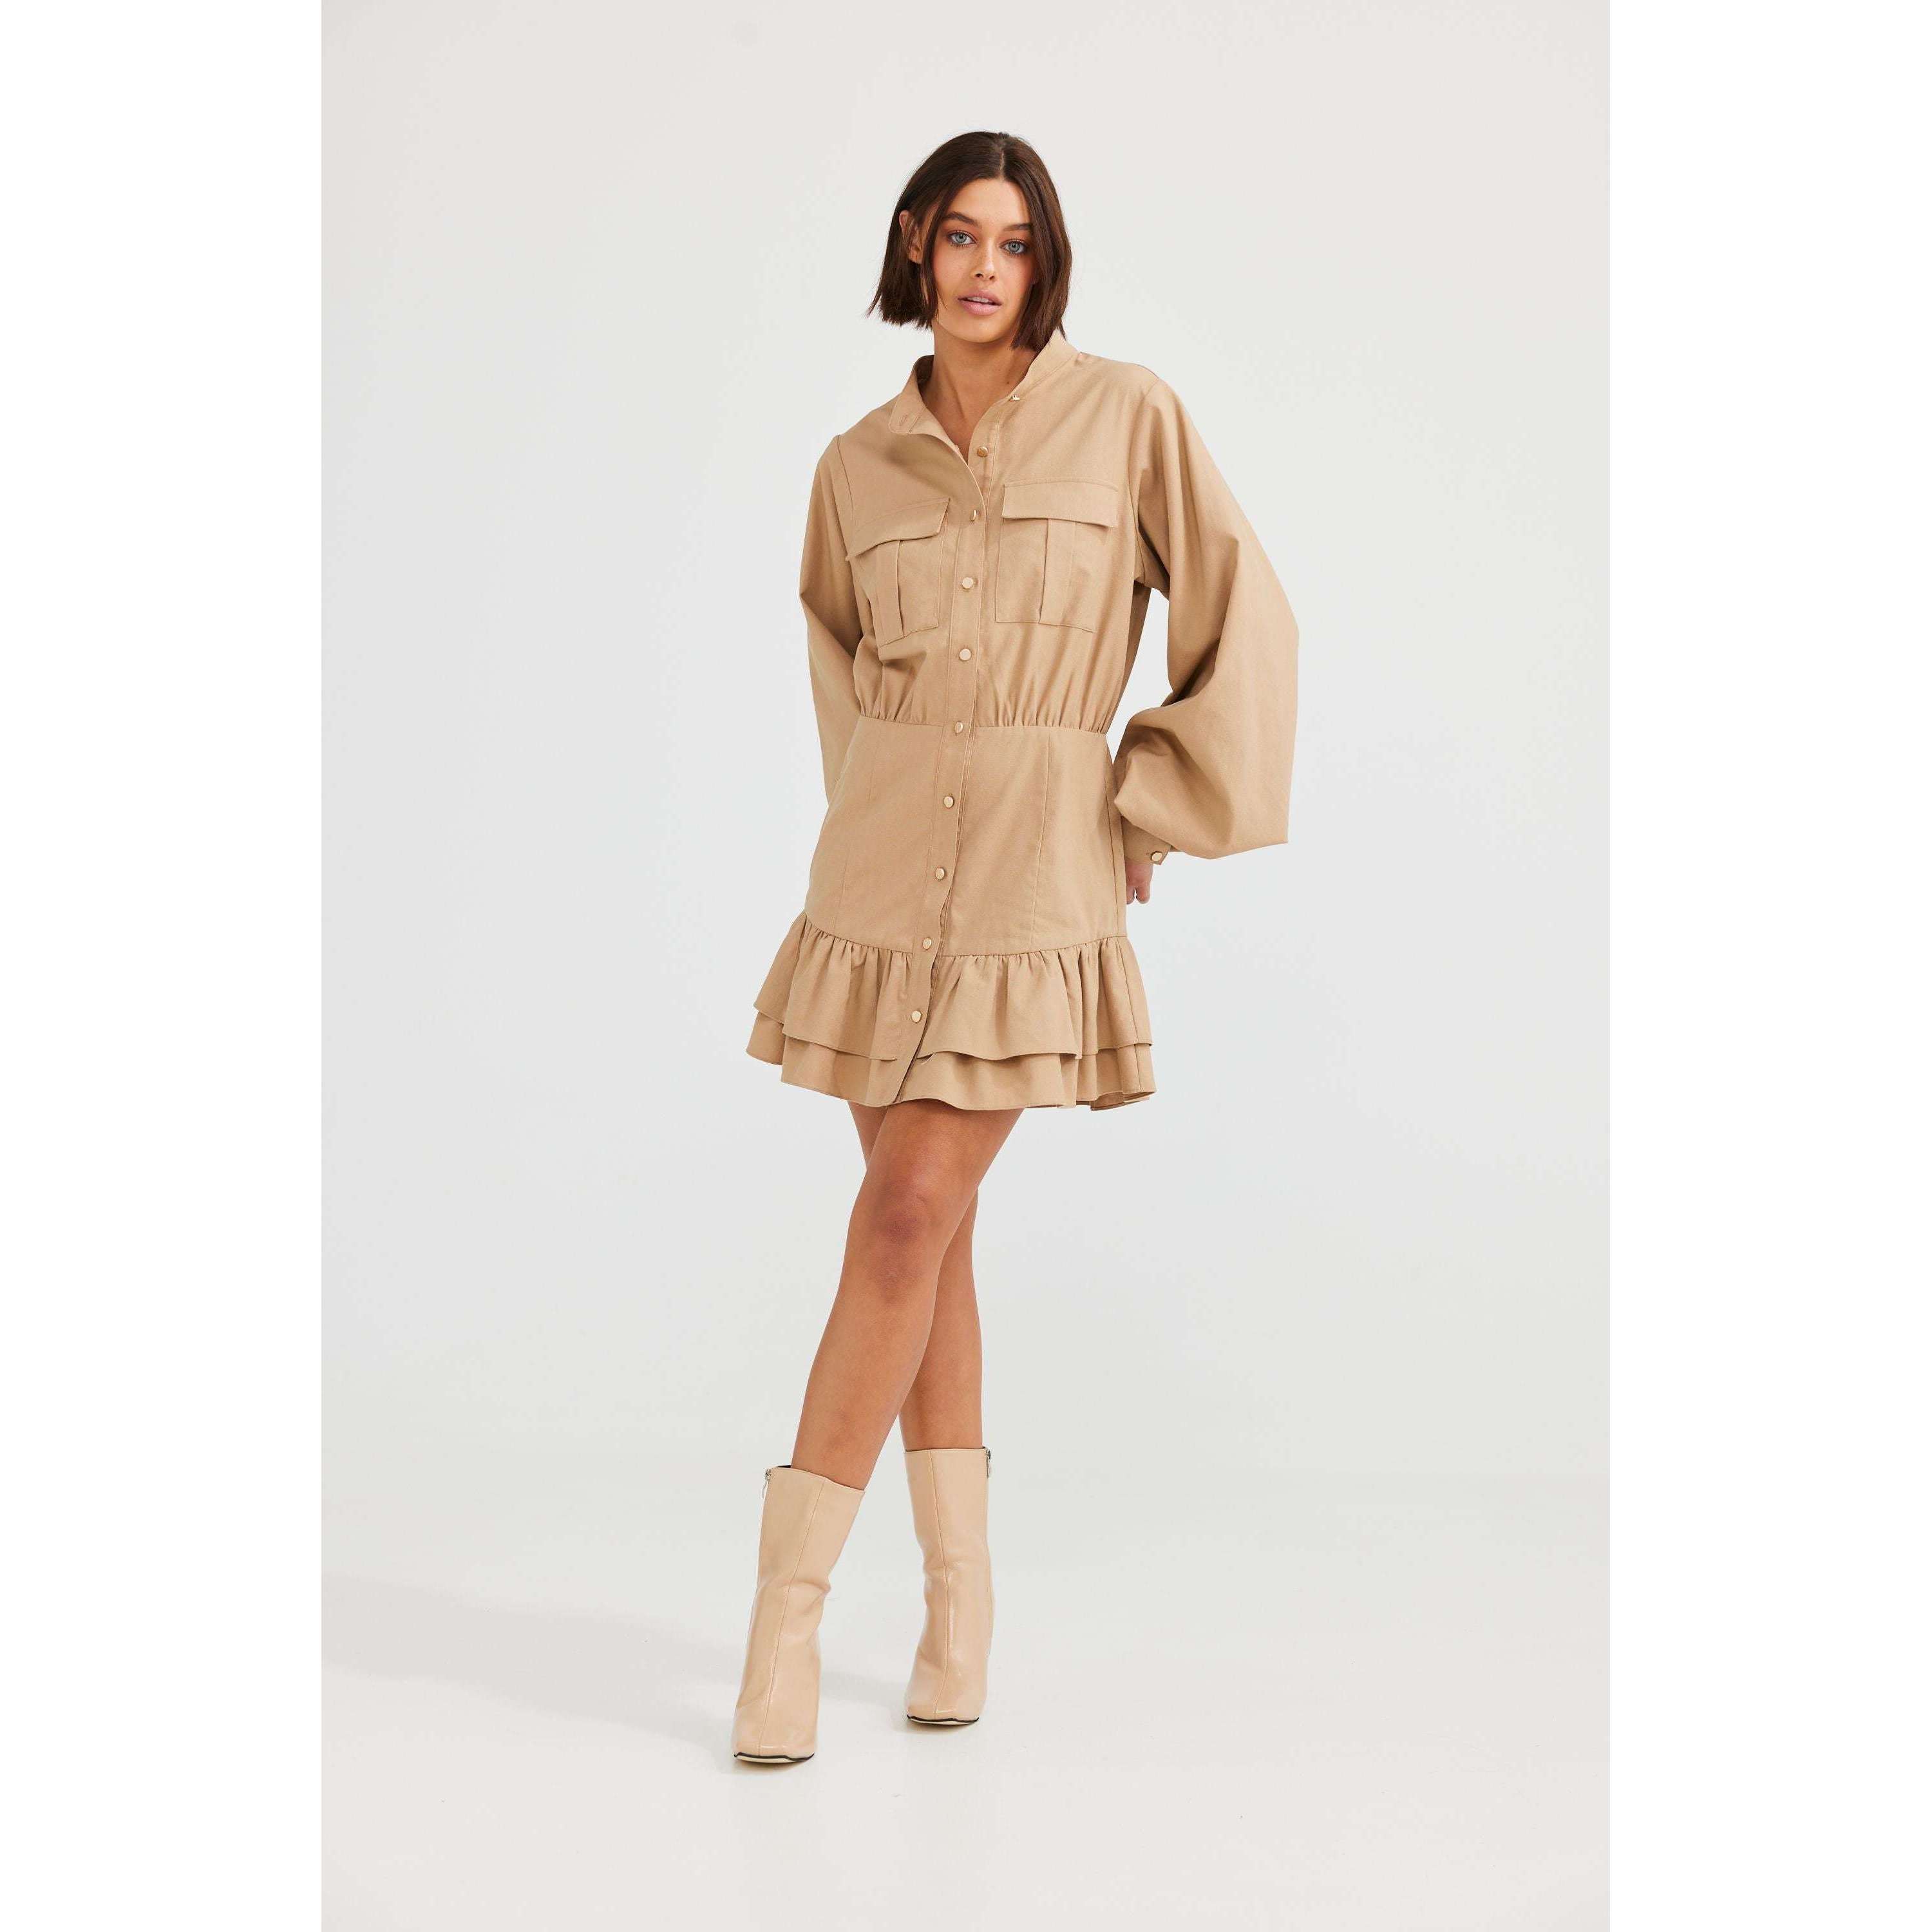 Impodimo Living & Giving:Billie Dress - Biscuit:Holiday Trading & Co